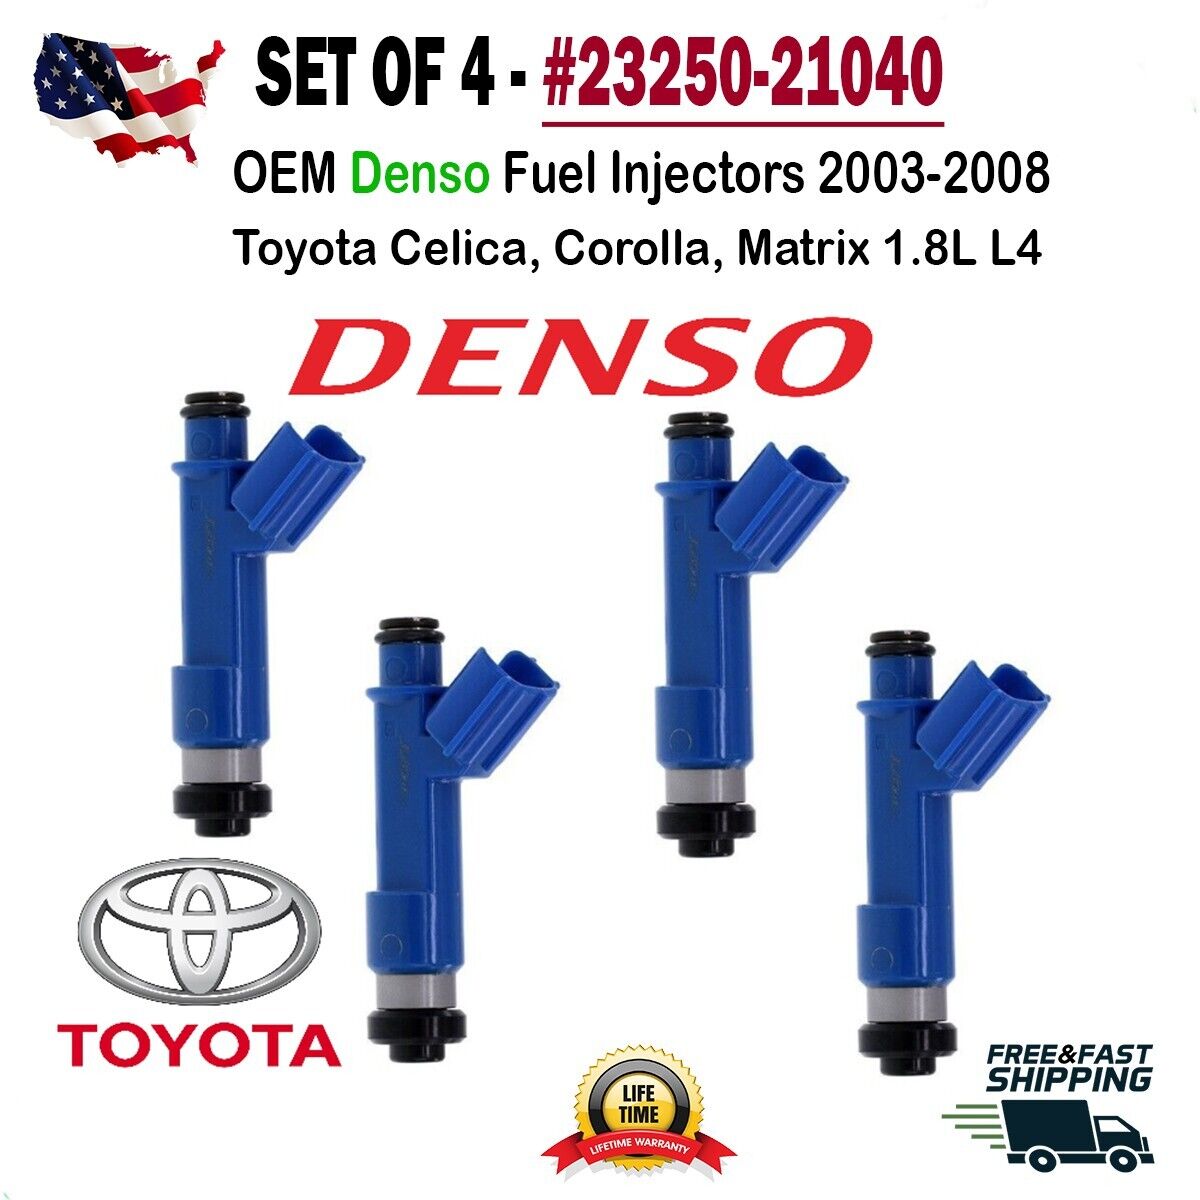 GENUINE Denso set of 4 Fuel Injectors for 2003-2008 Toyota 1.8L L4 #23250-21040